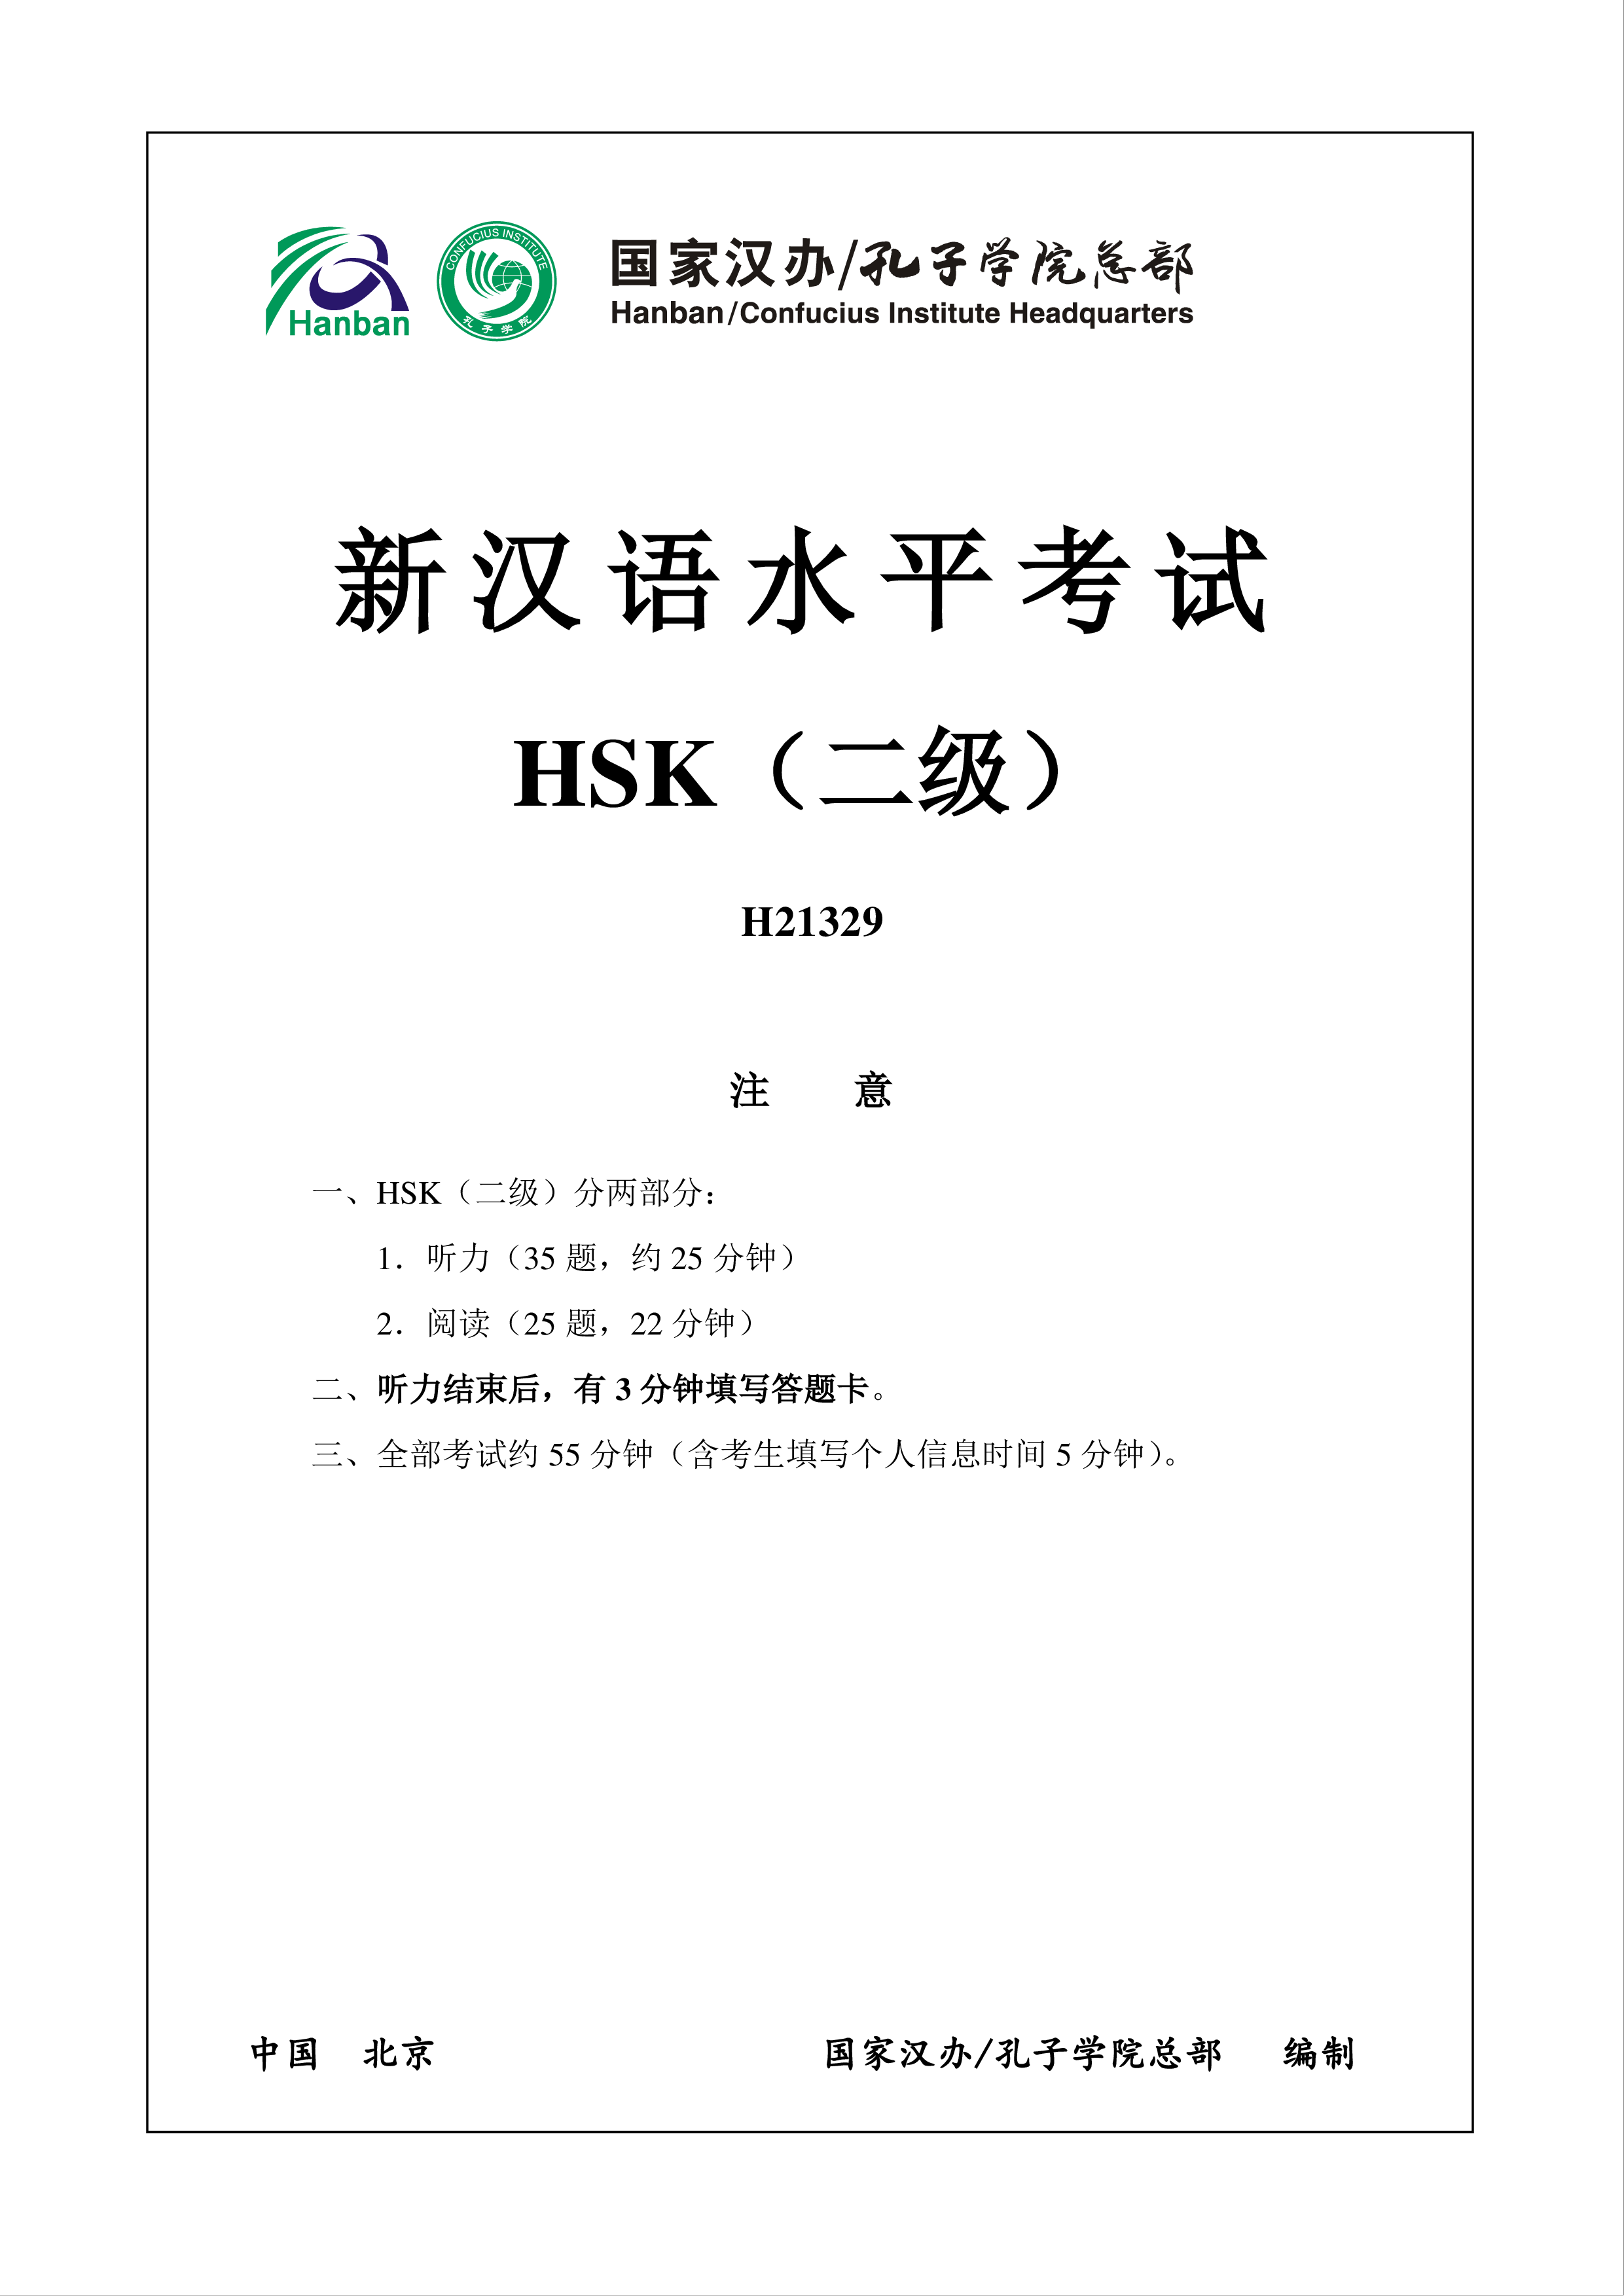 hsk2 chinese exam incl audio and answers # h21329 plantilla imagen principal